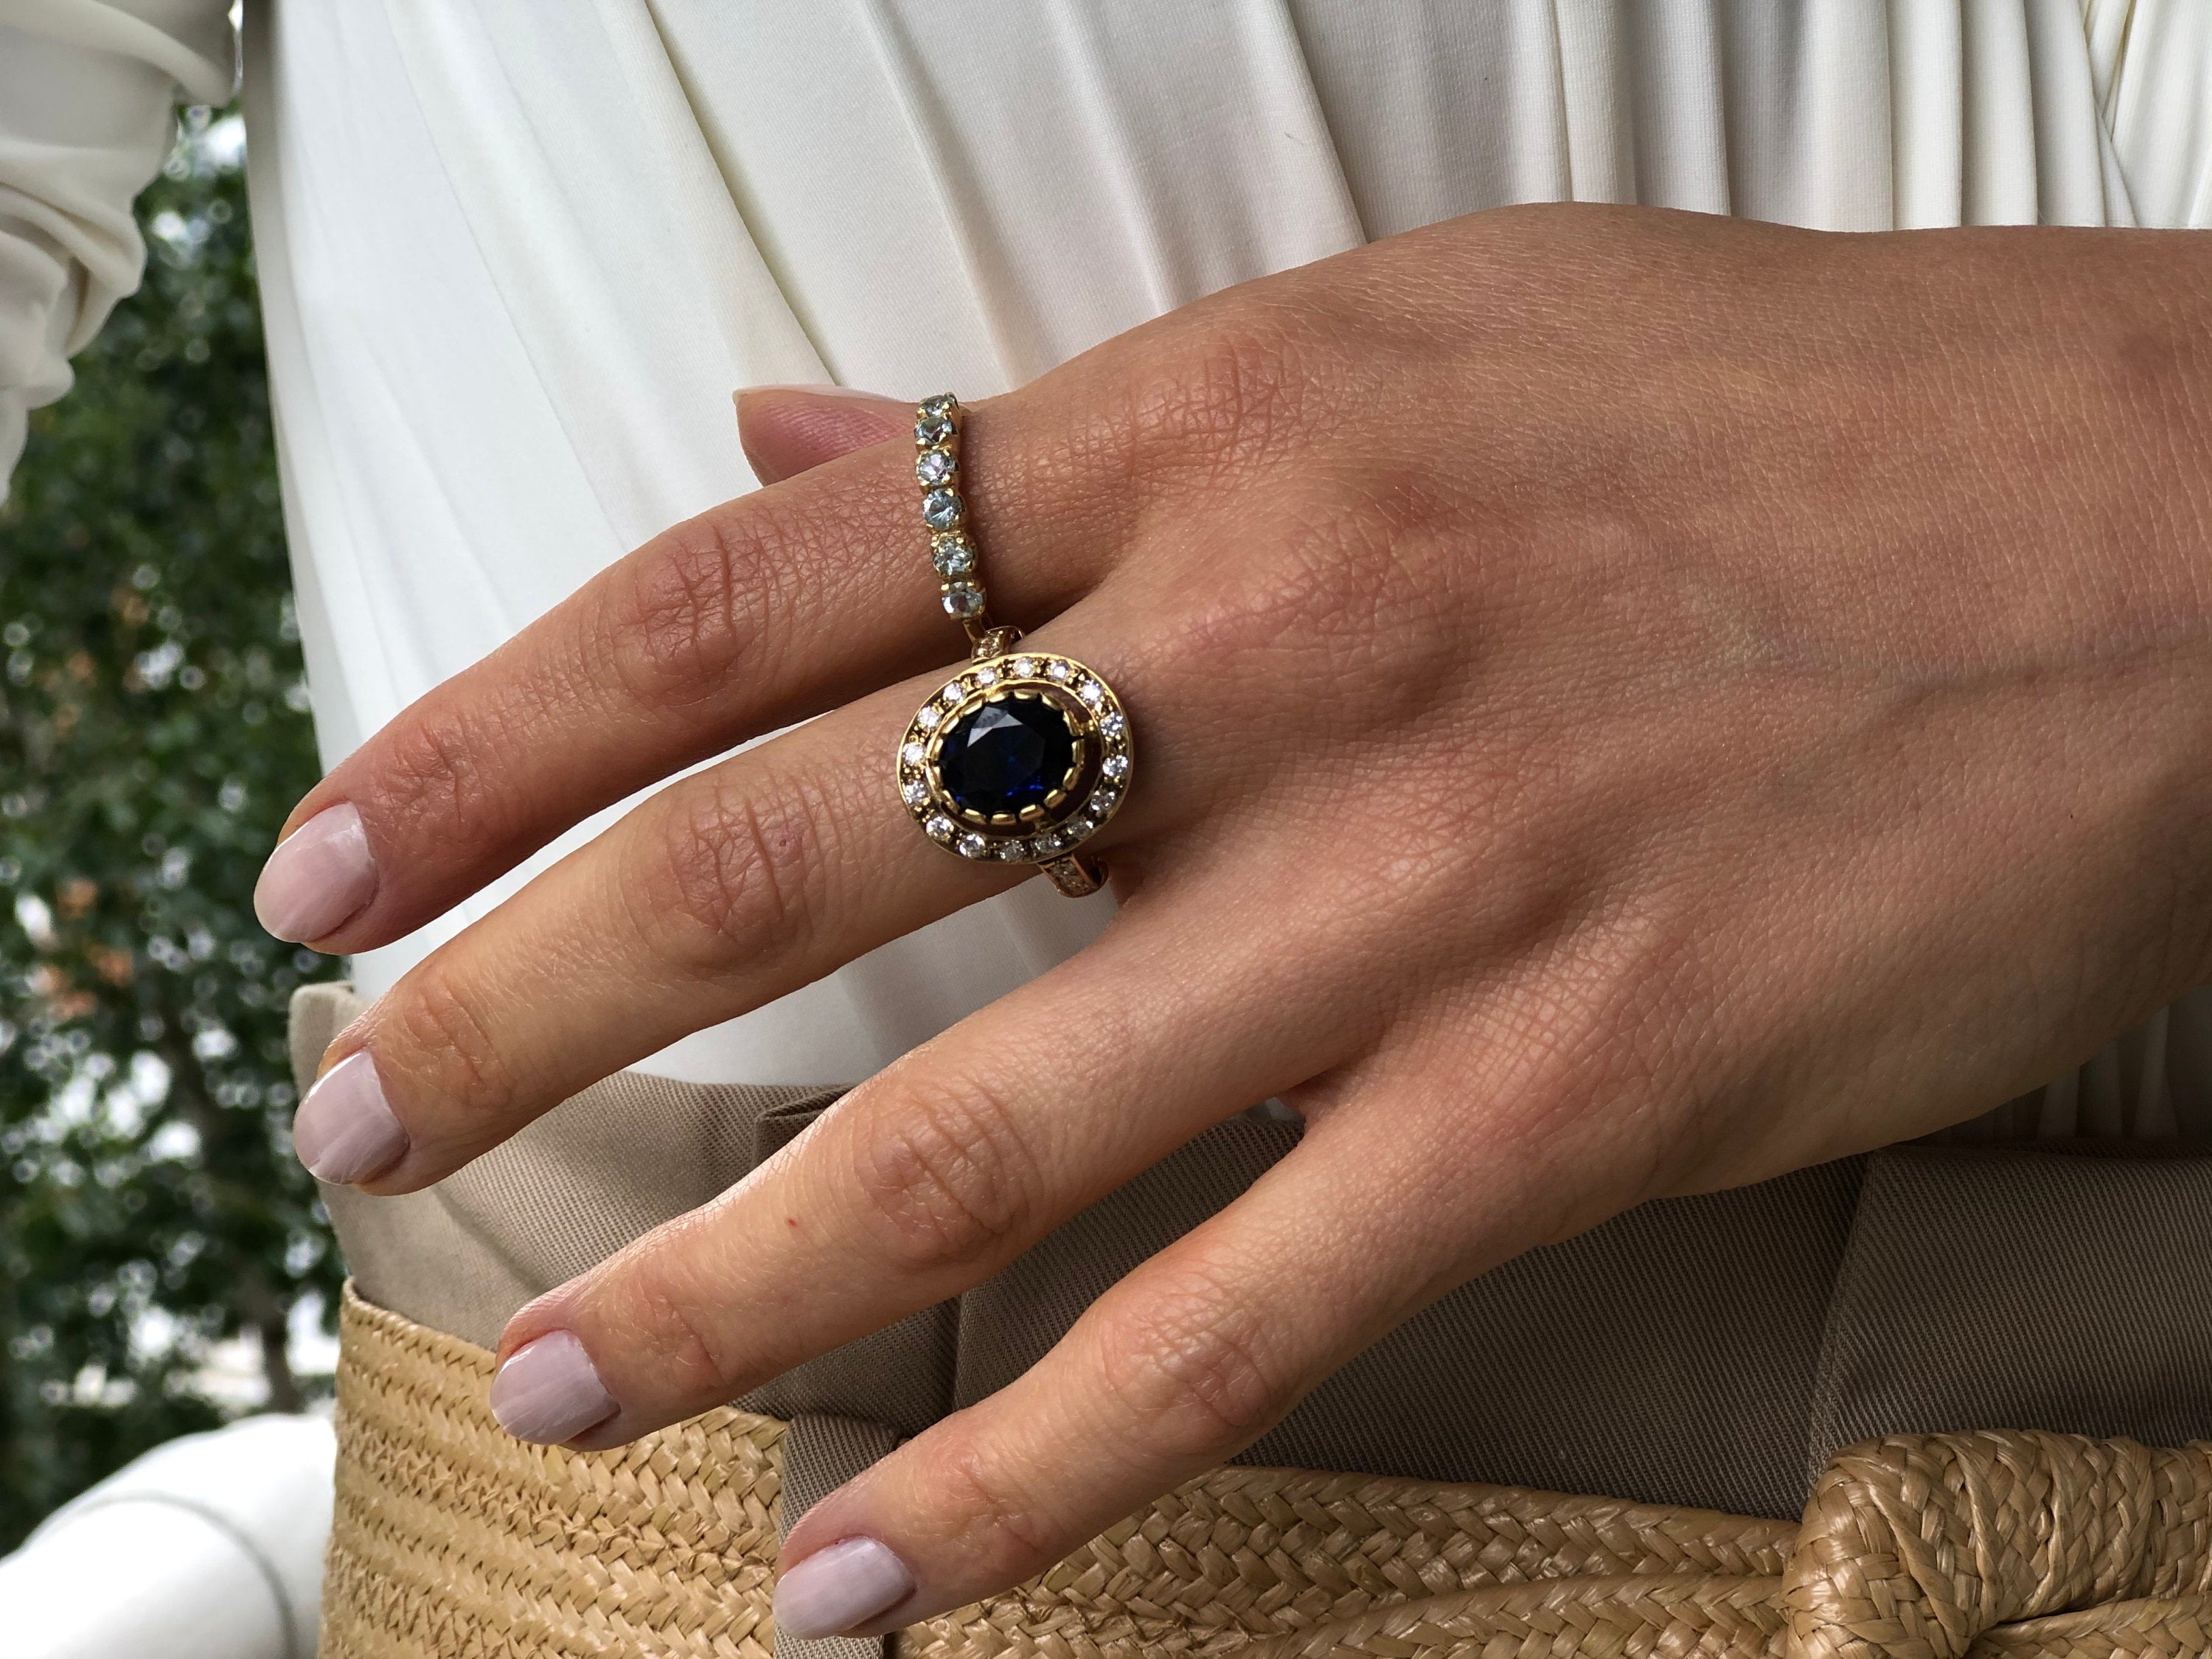 Gold Oval Victorian Sapphire Ring with Halo